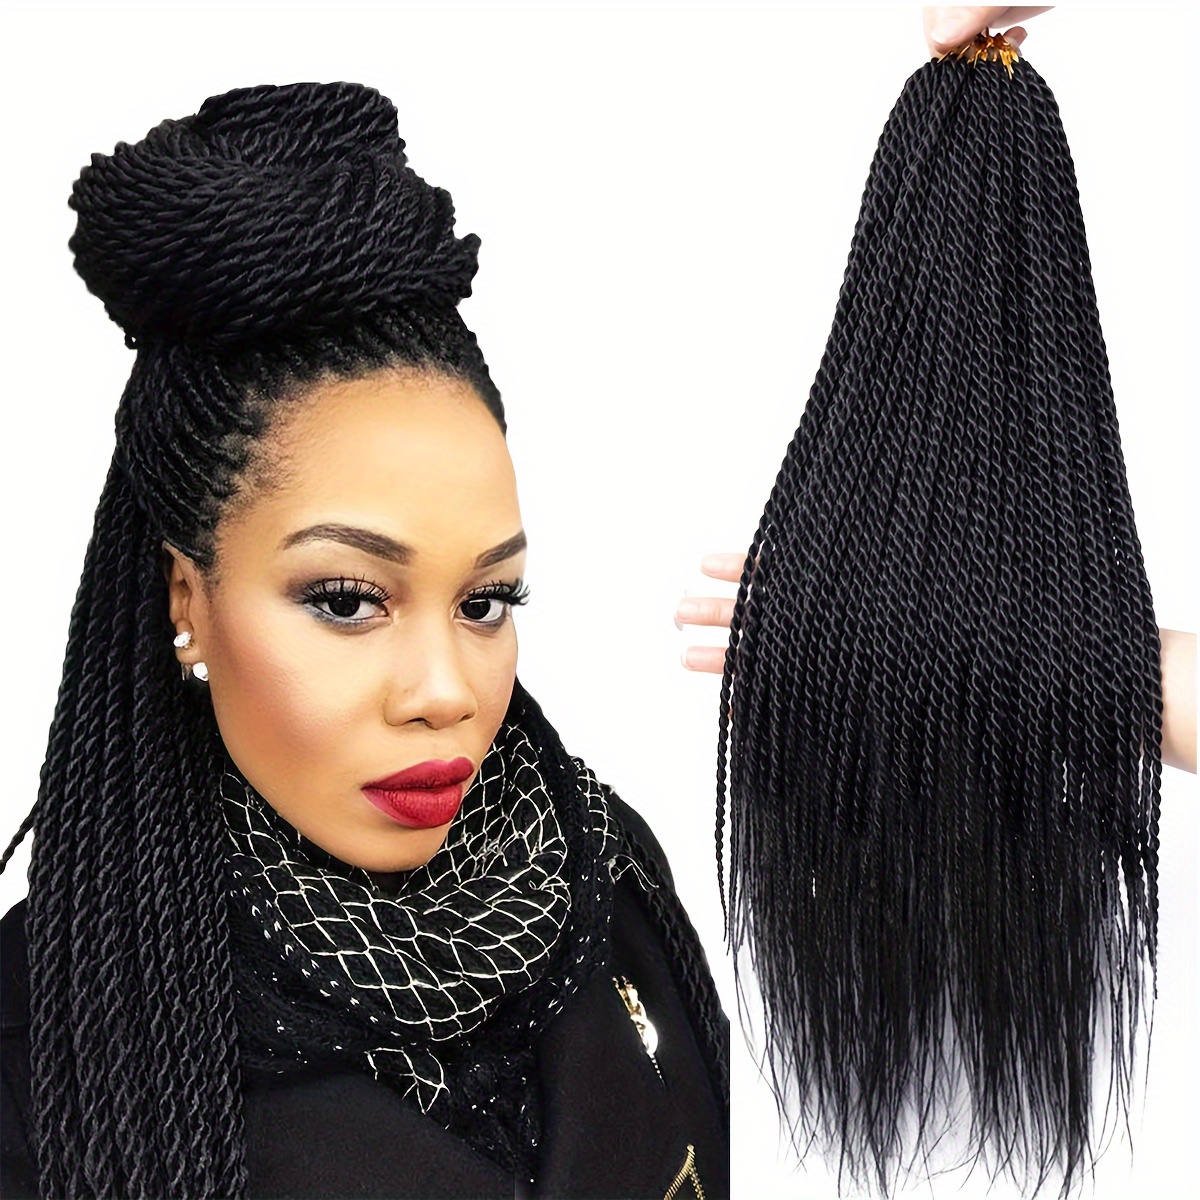 Senegalese Twist 32 Inches Pre-looped Synthetic Braiding Hair